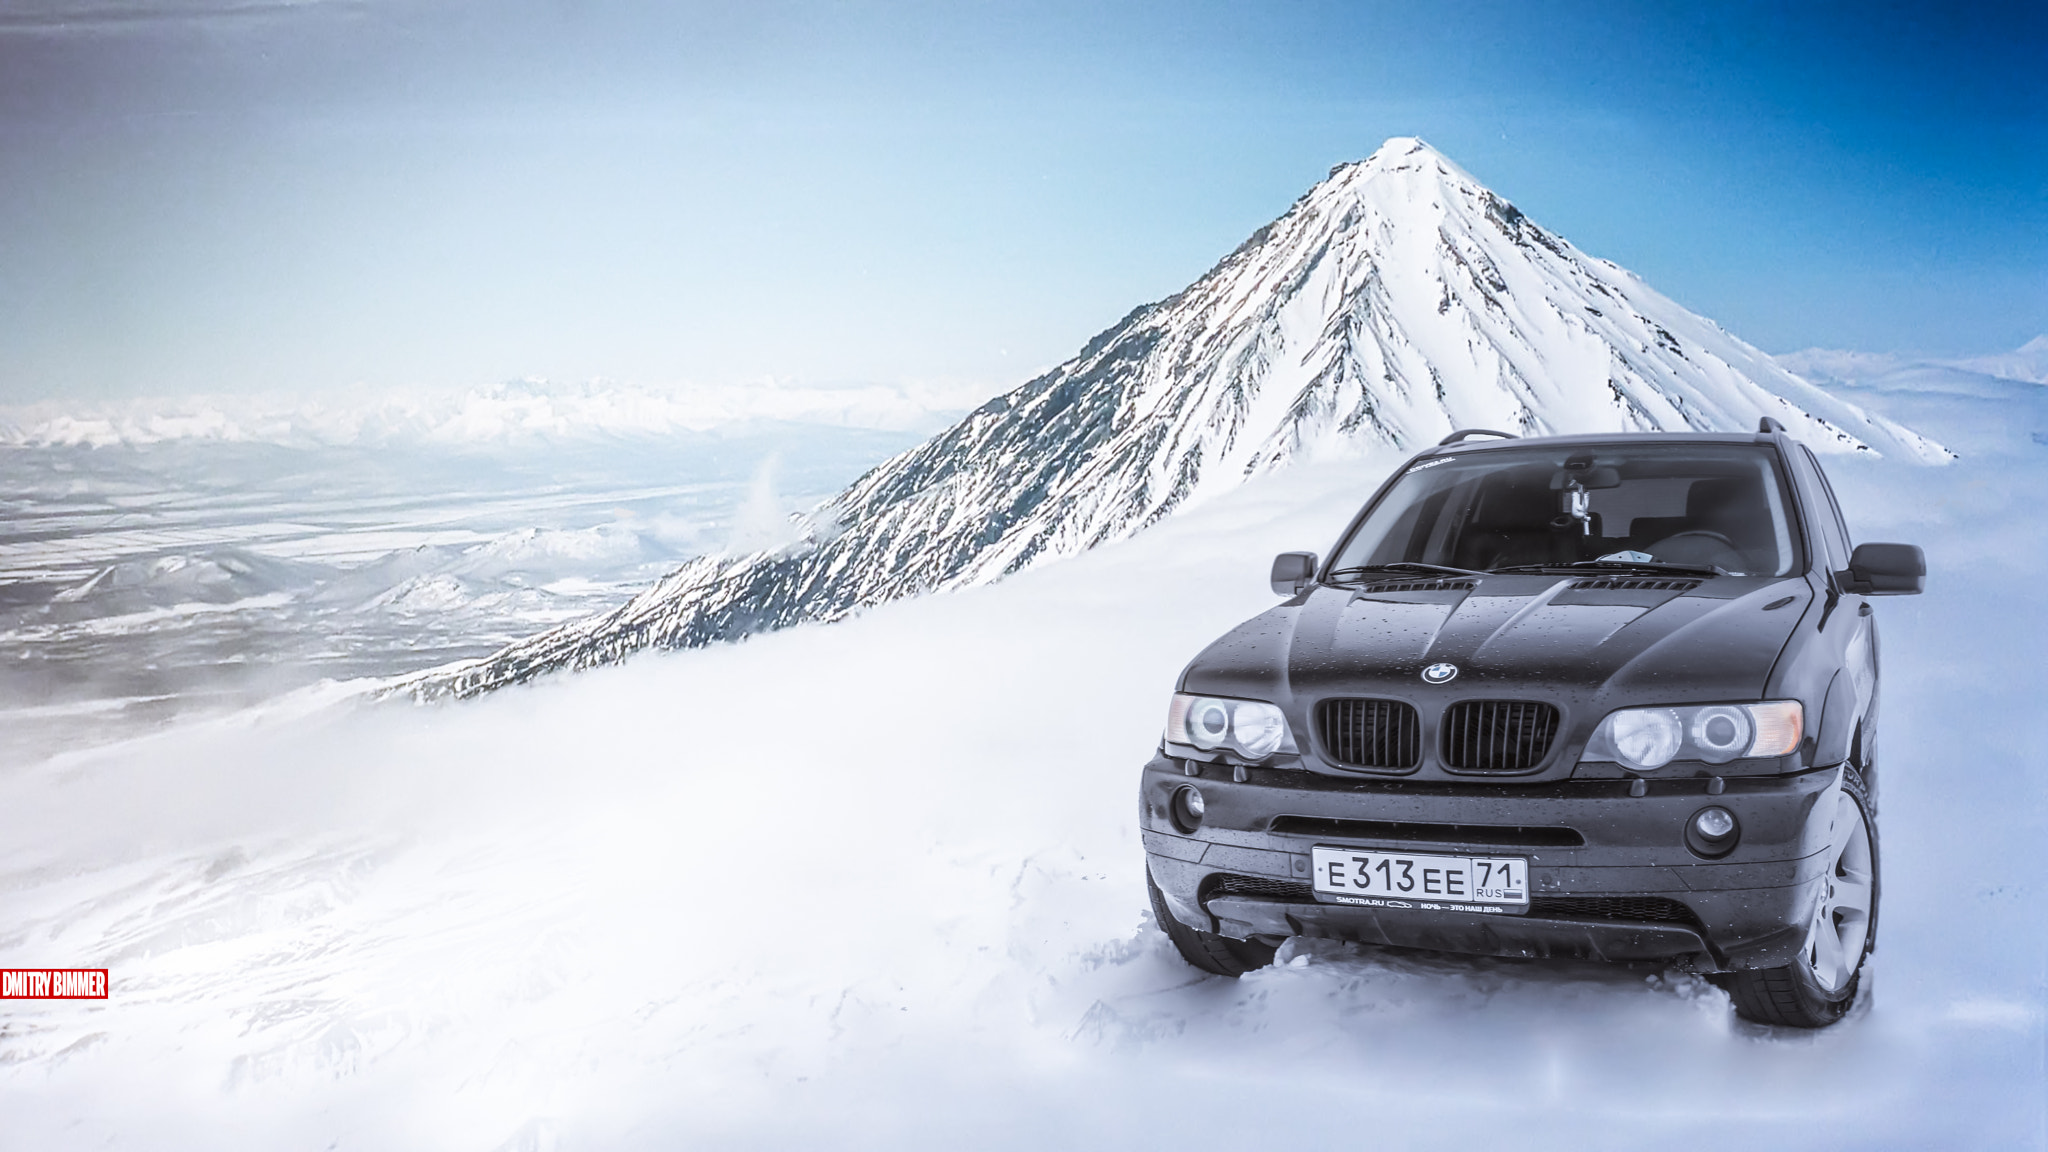 Sony a99 II + Tamron SP 24-70mm F2.8 Di VC USD sample photo. Bmw in the mountains photography